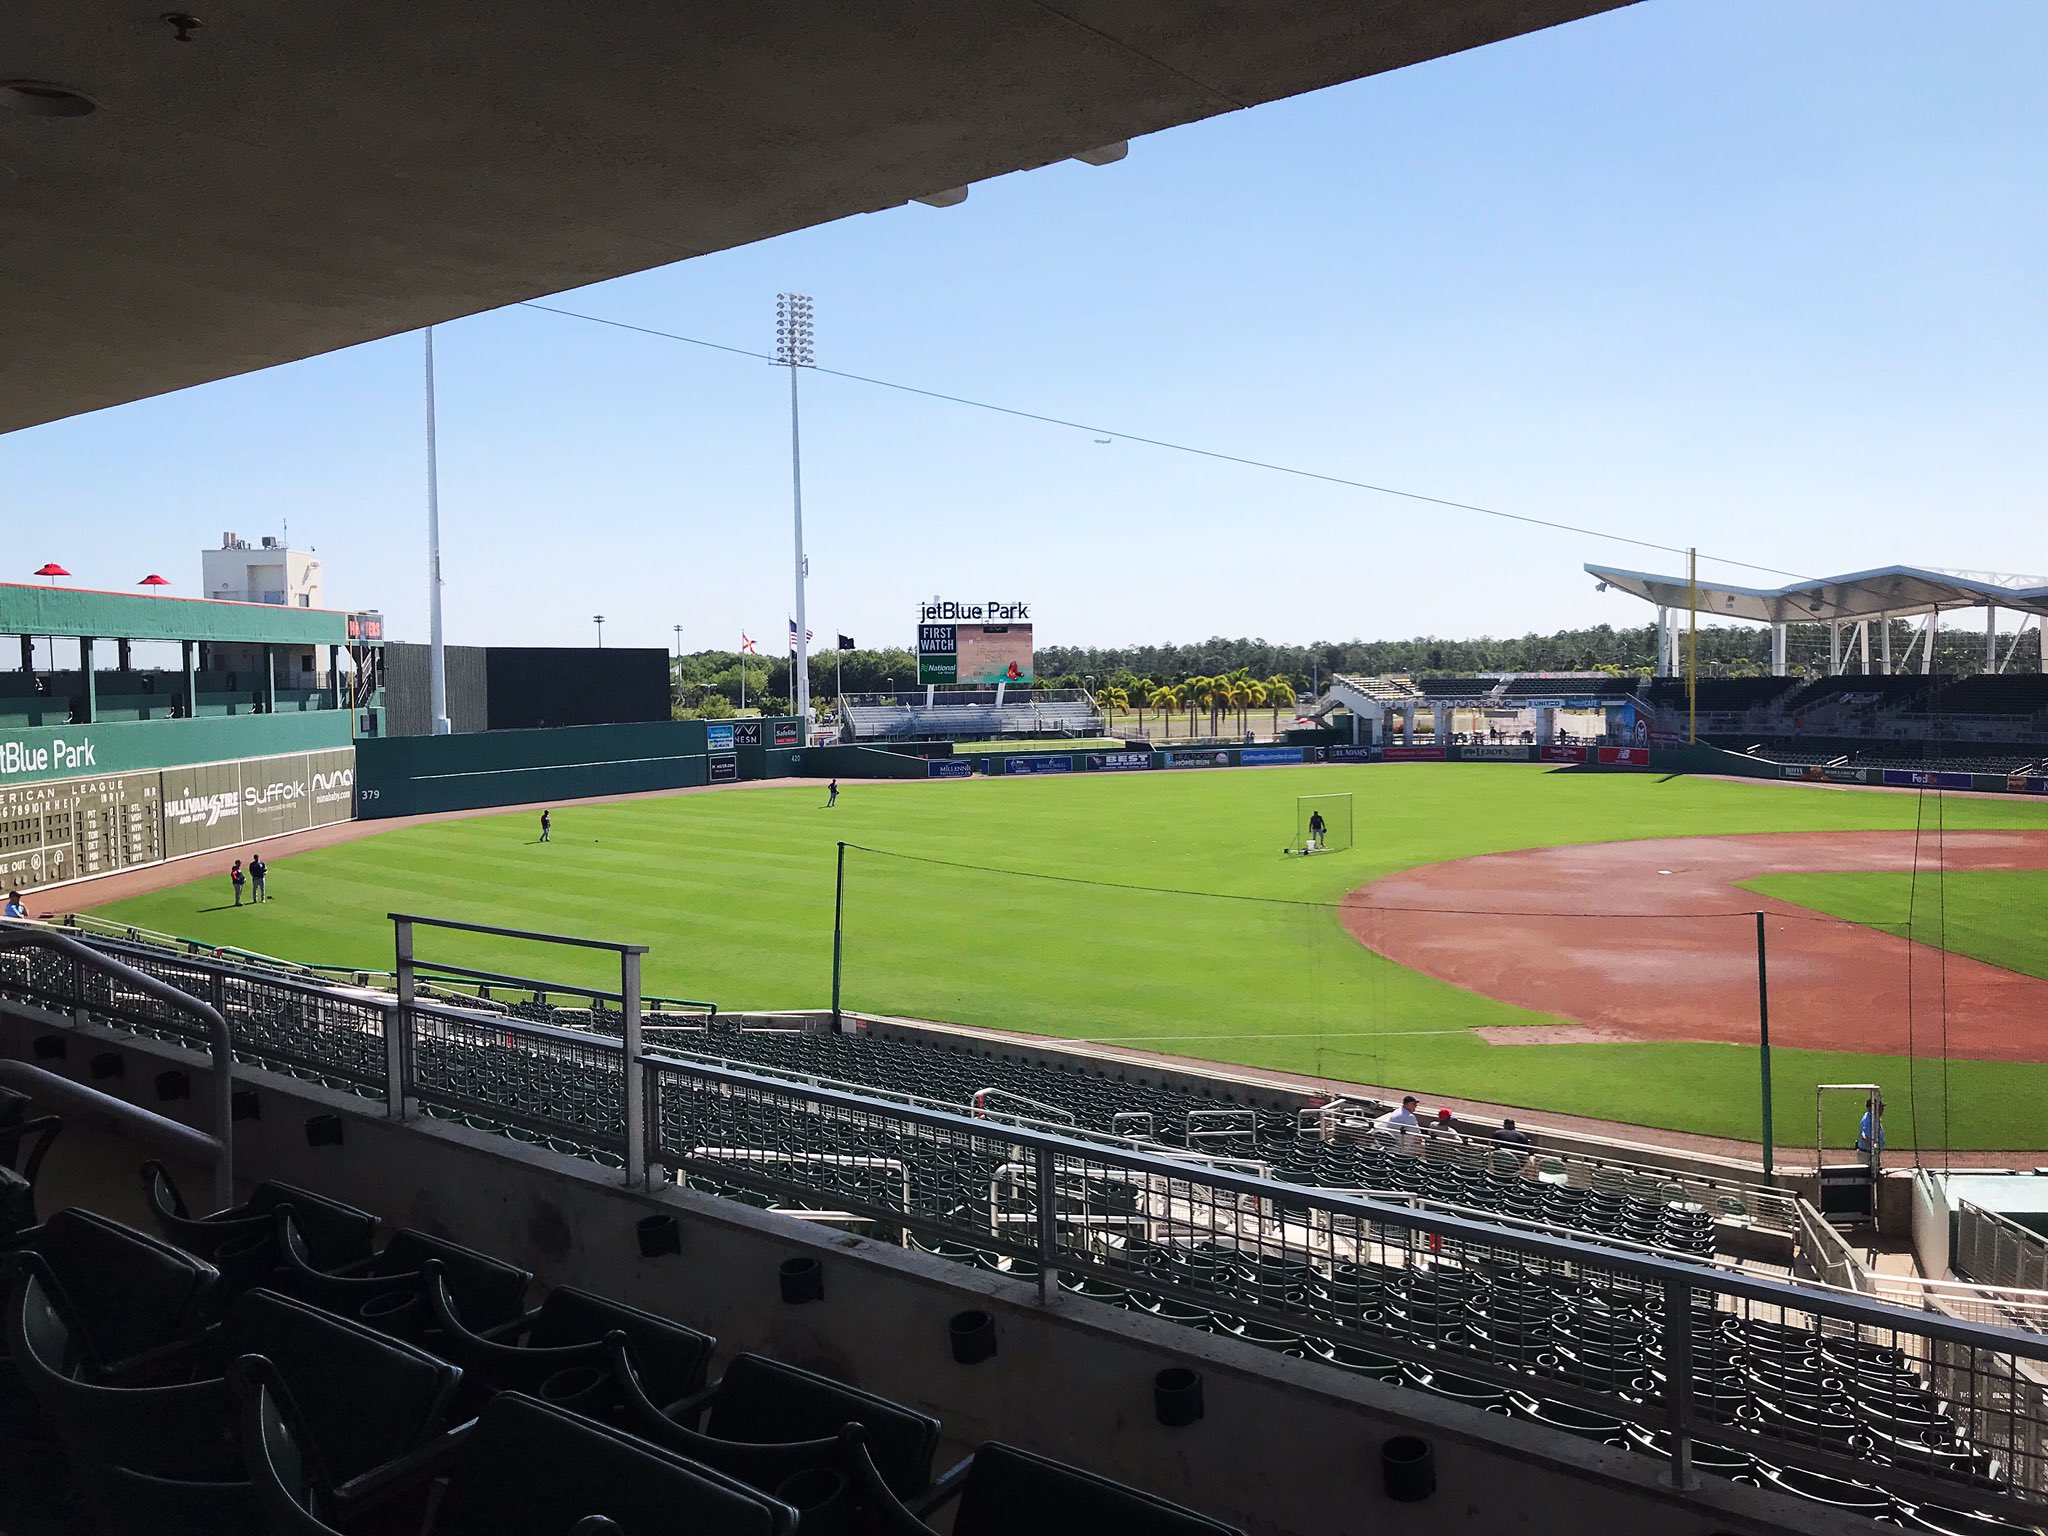 David O'Brien on Twitter: Nice, breezy day at JetBlue Park in Fort Myers.  #braves at #redsox  / X